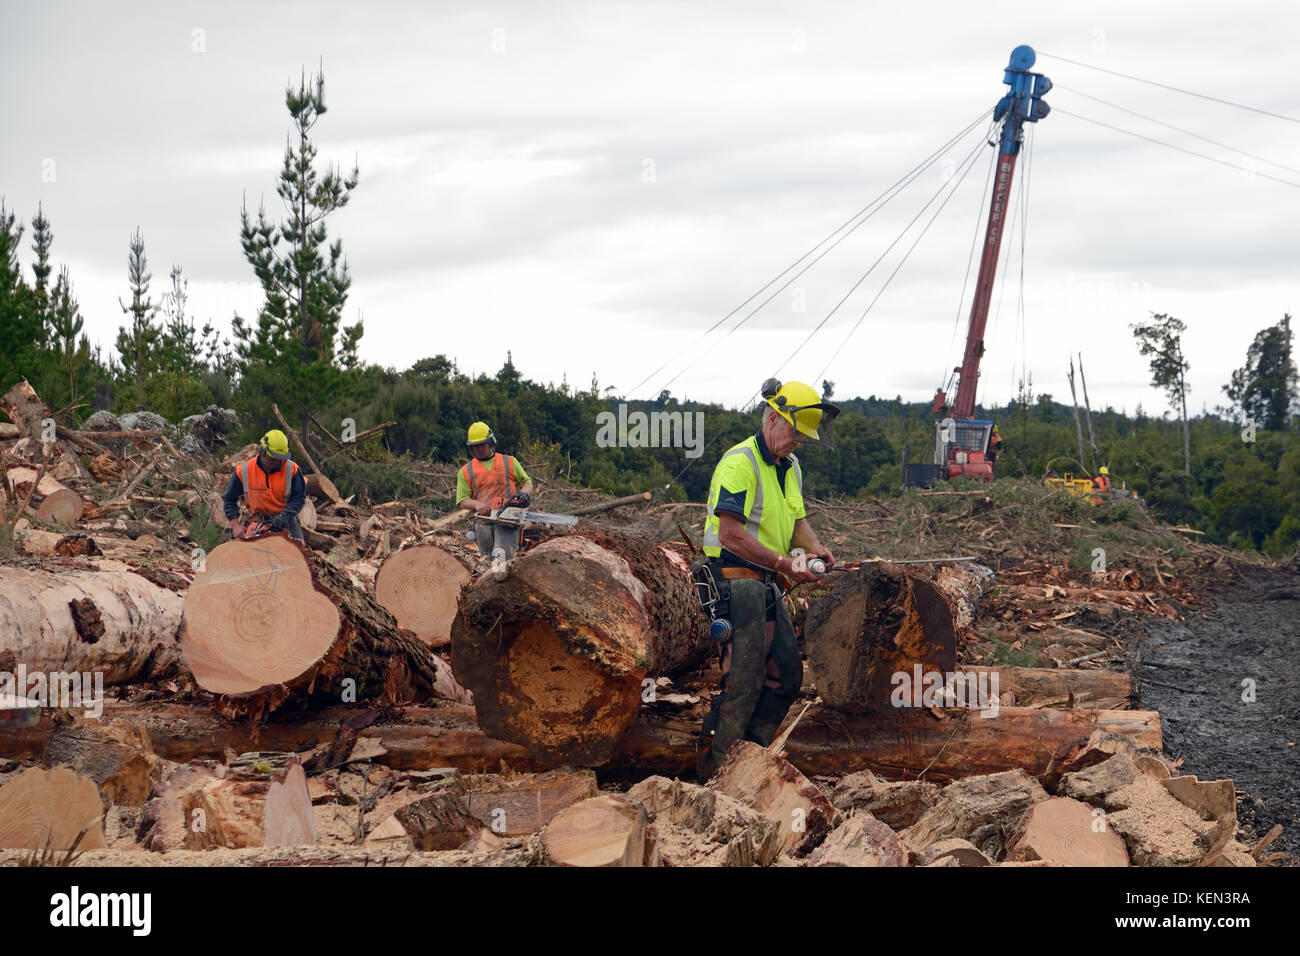 KUMARA, NEW ZEALAND, SEPTEMBER 20, 2017: A team of forestry workers measure and cut Pinus radiata logs to length at a logging site near Kumara, West C Stock Photo